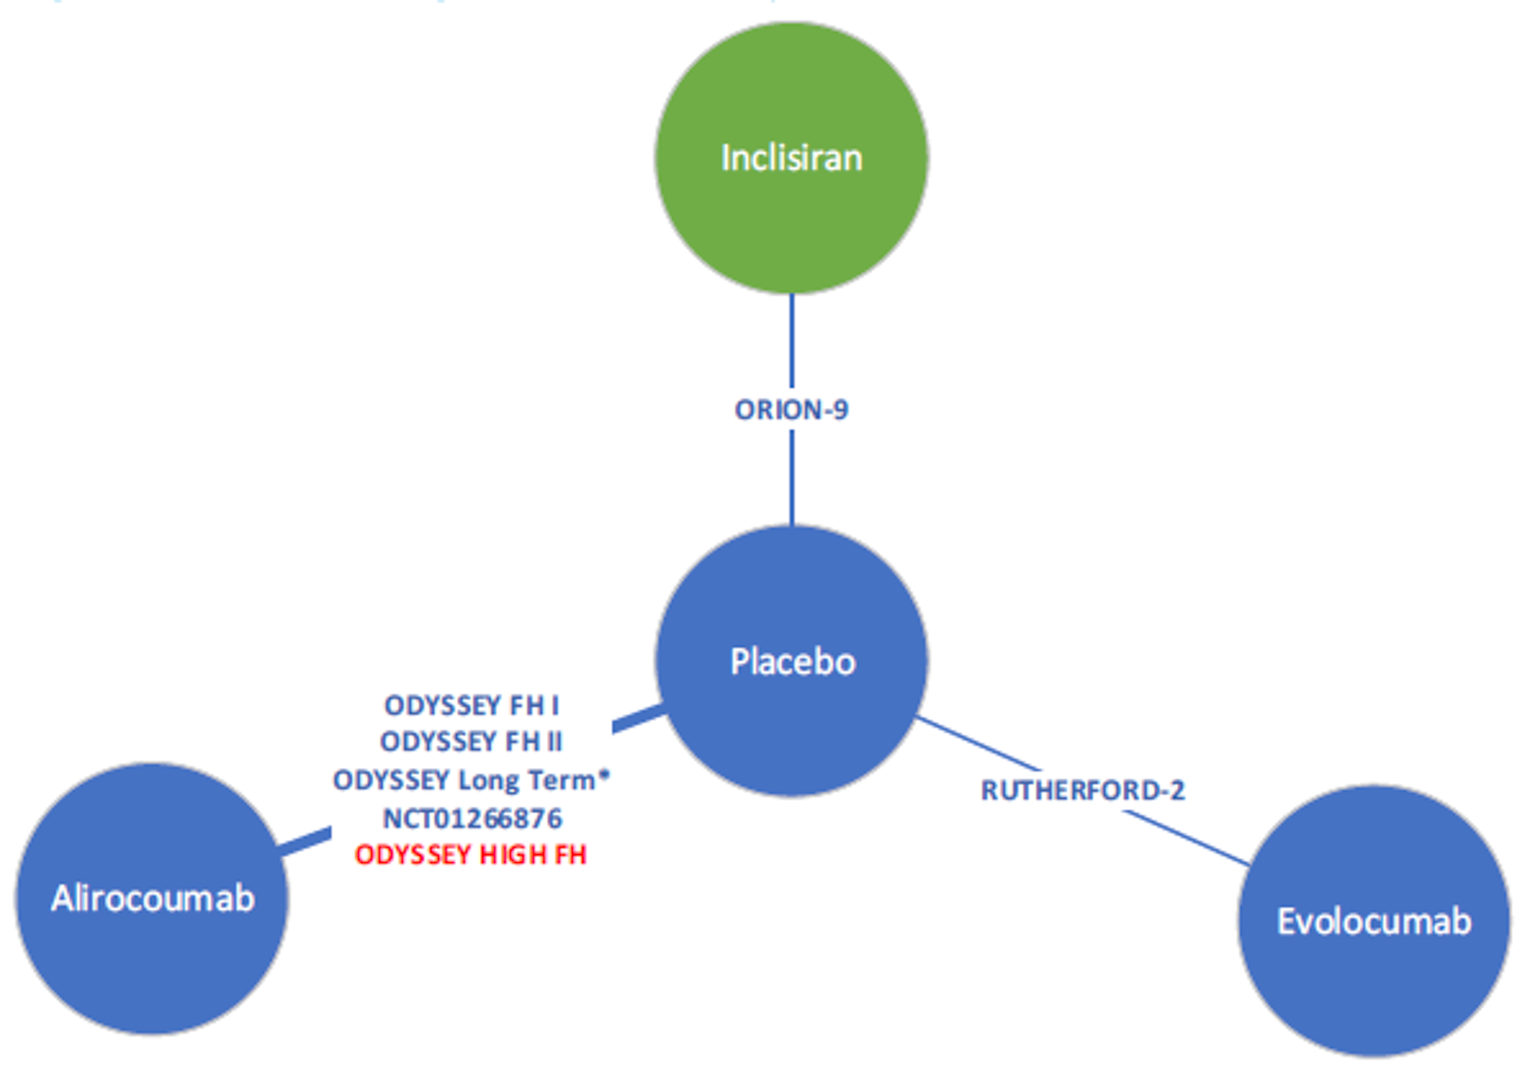 Network diagram for the NMA on HeFH populations on MTD statins. The evidence network consists of inclisiran, alirocumab, and evolocumab, all connected by placebo. The ORION-9 trial connects inclisiran and placebo nodes, while 5 trials connect the alirocumab and placebo nodes (ODYSSEY FH I, ODYSSEY FH II, ODYSSEY Long-term, NCT01266876, and ODYSSEY HIGH FH). The RUTHERFORD-2 trial connects the evolocumab and placebo nodes.